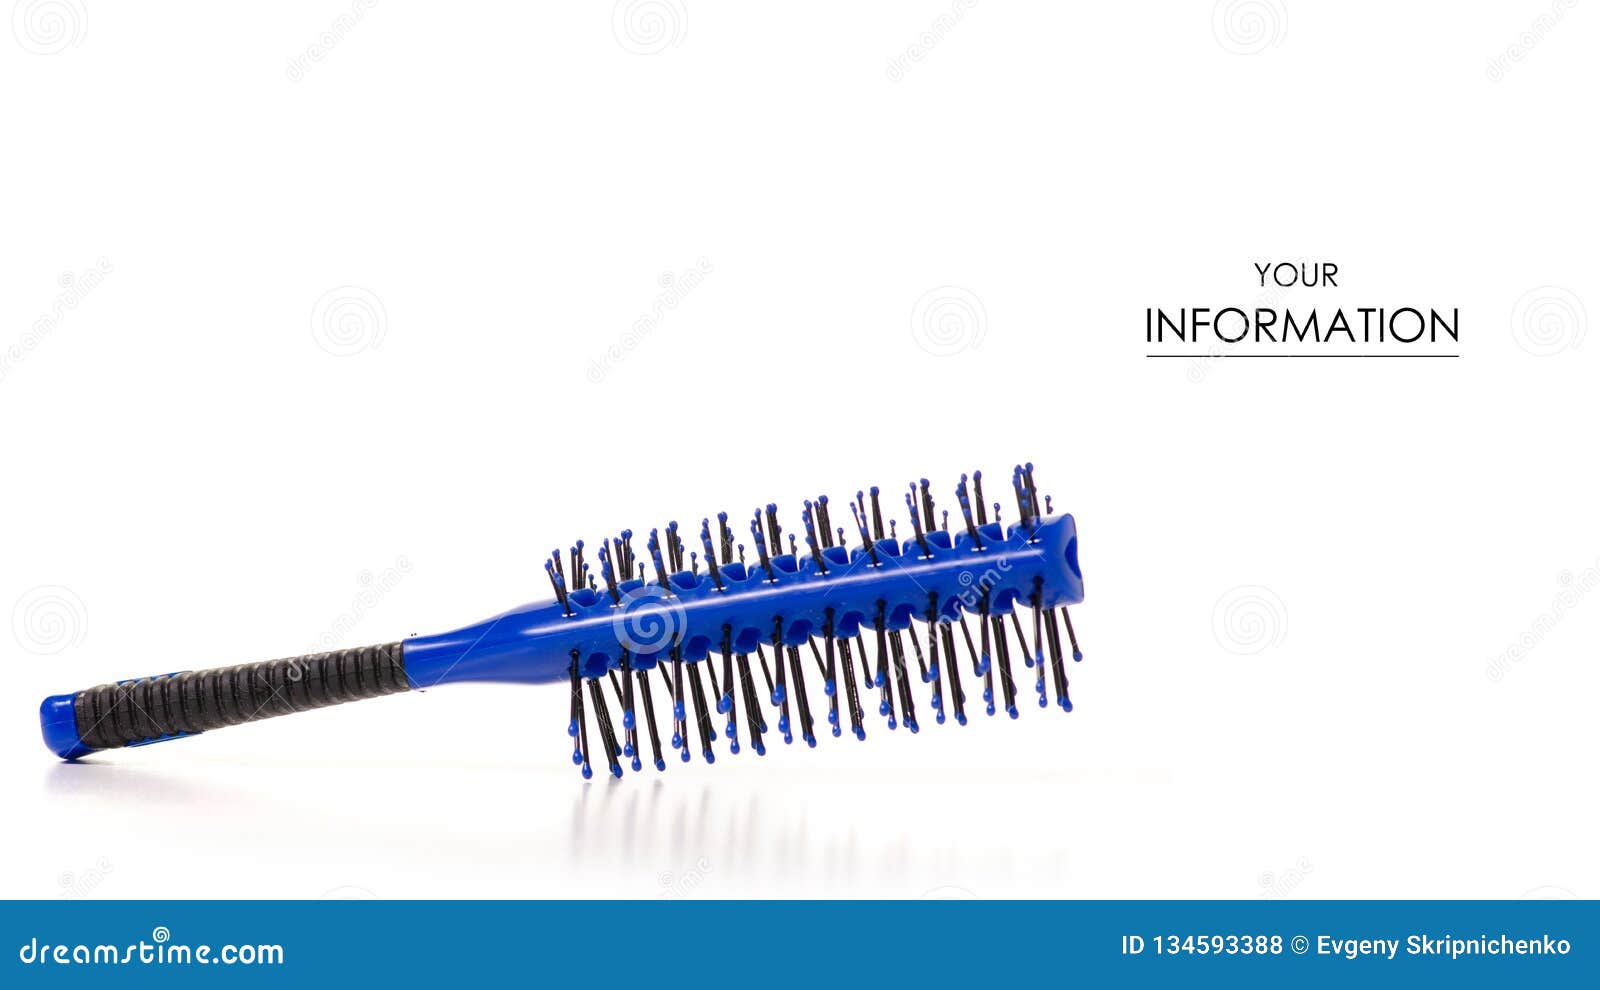 7. Burgundy and Light Blue Hair Comb - wide 6